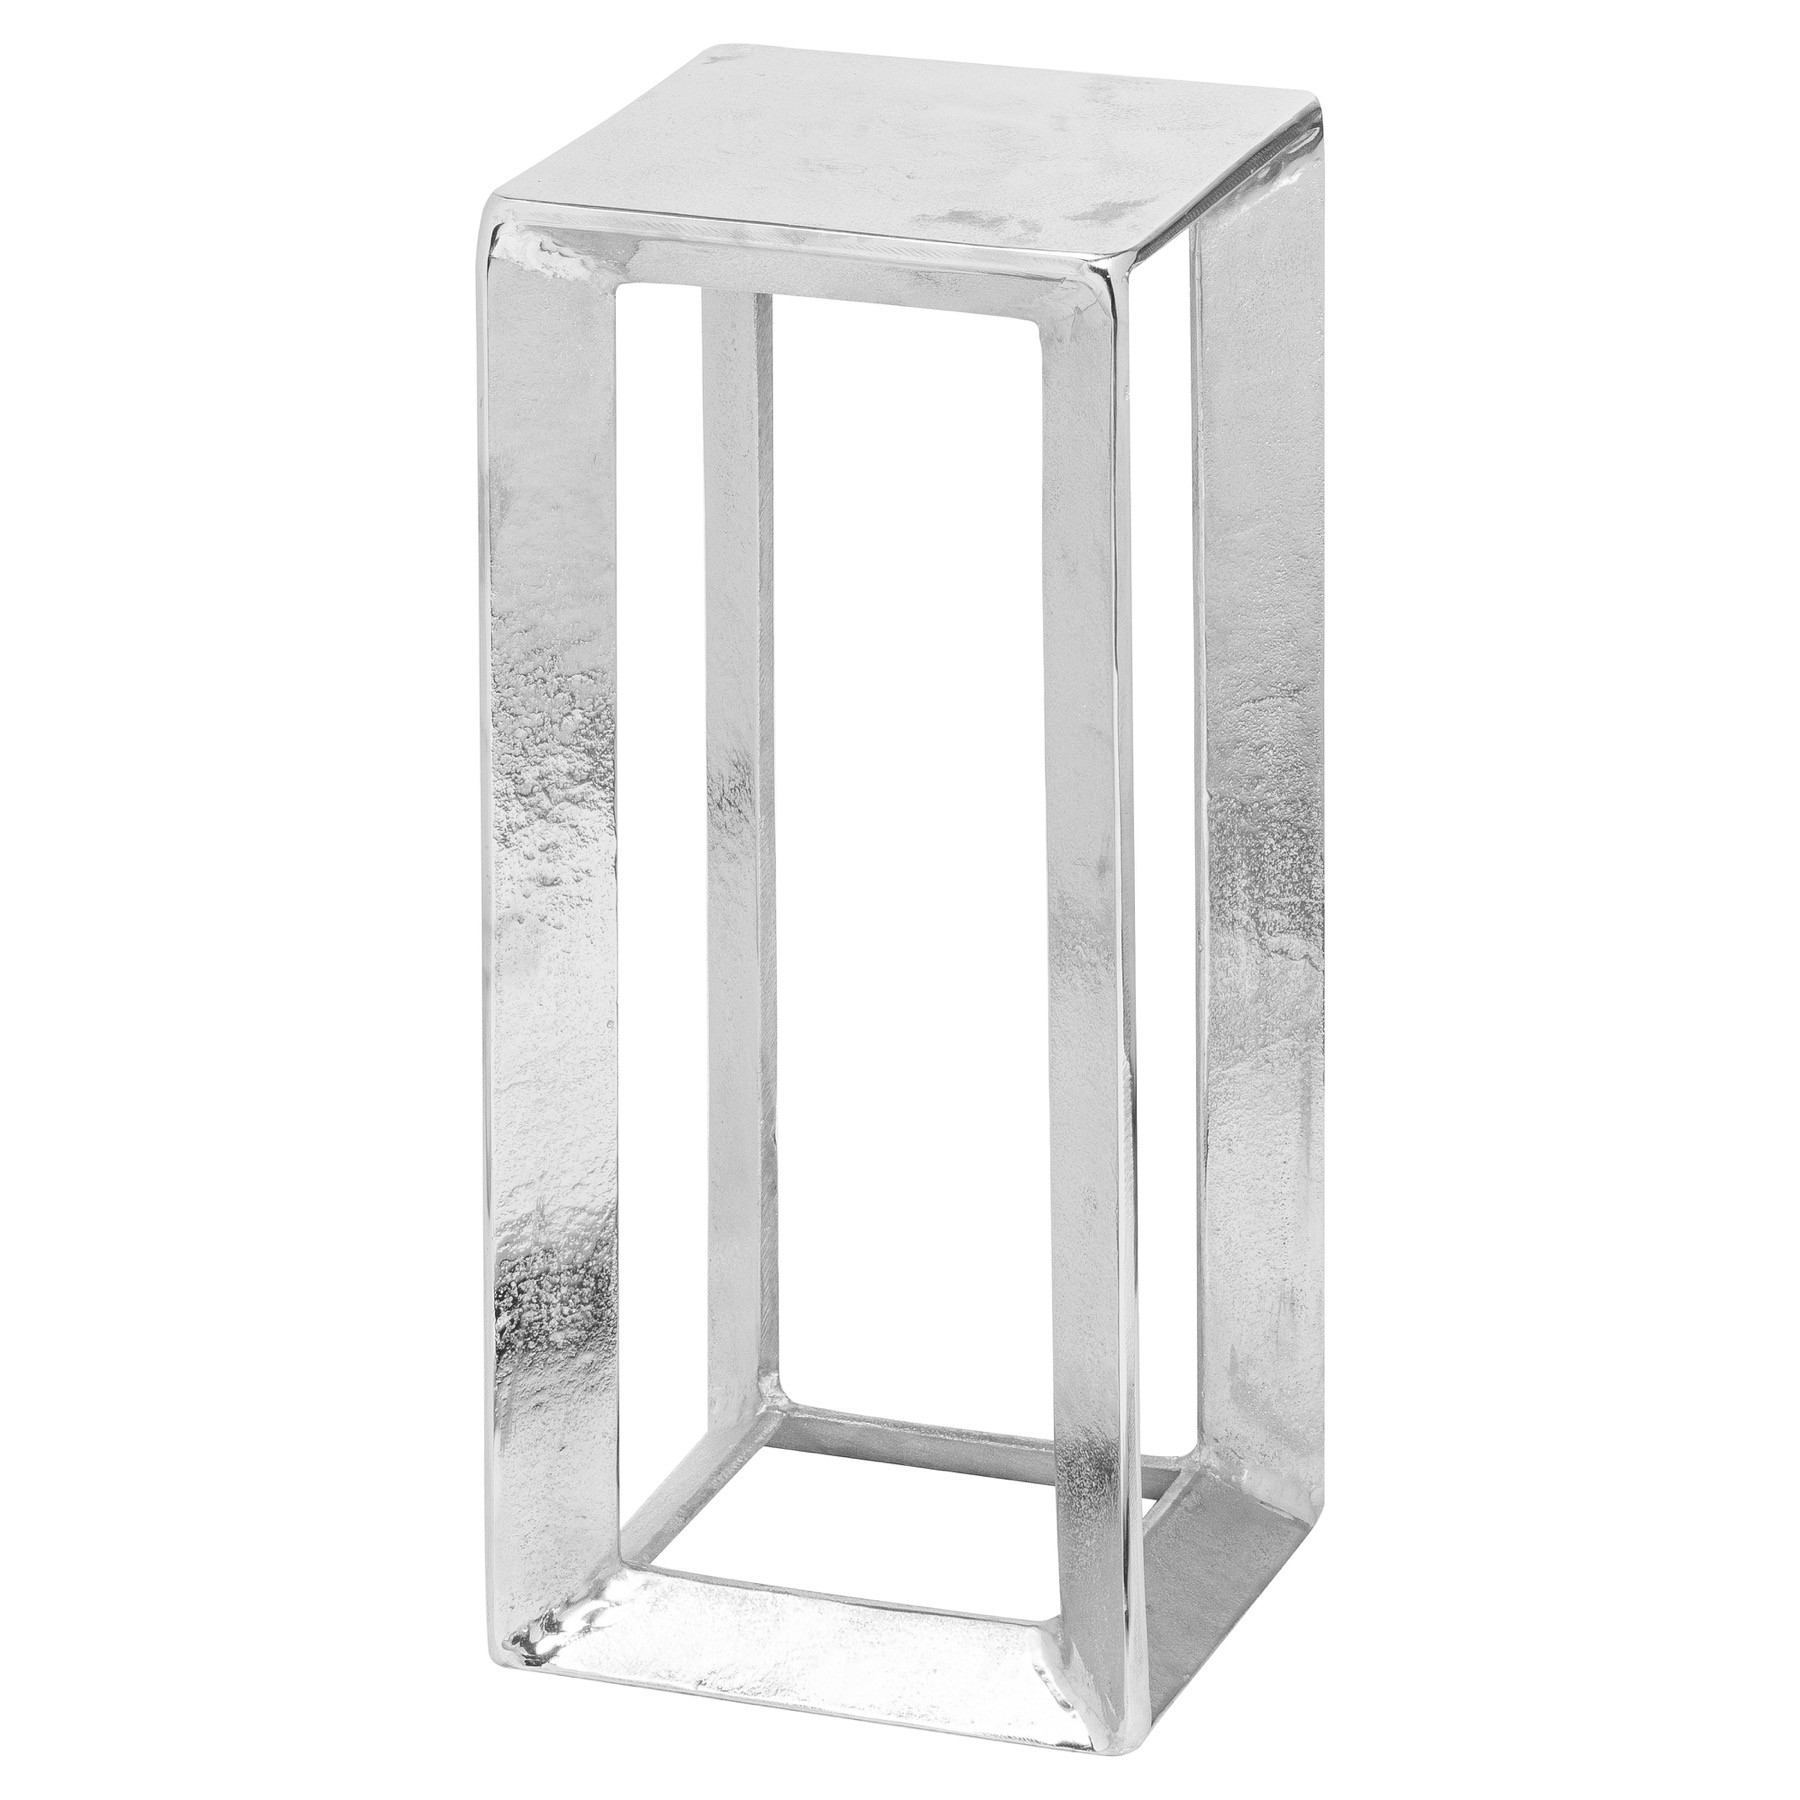 Farrah Collection Small Silver Plant Stand - Image 1